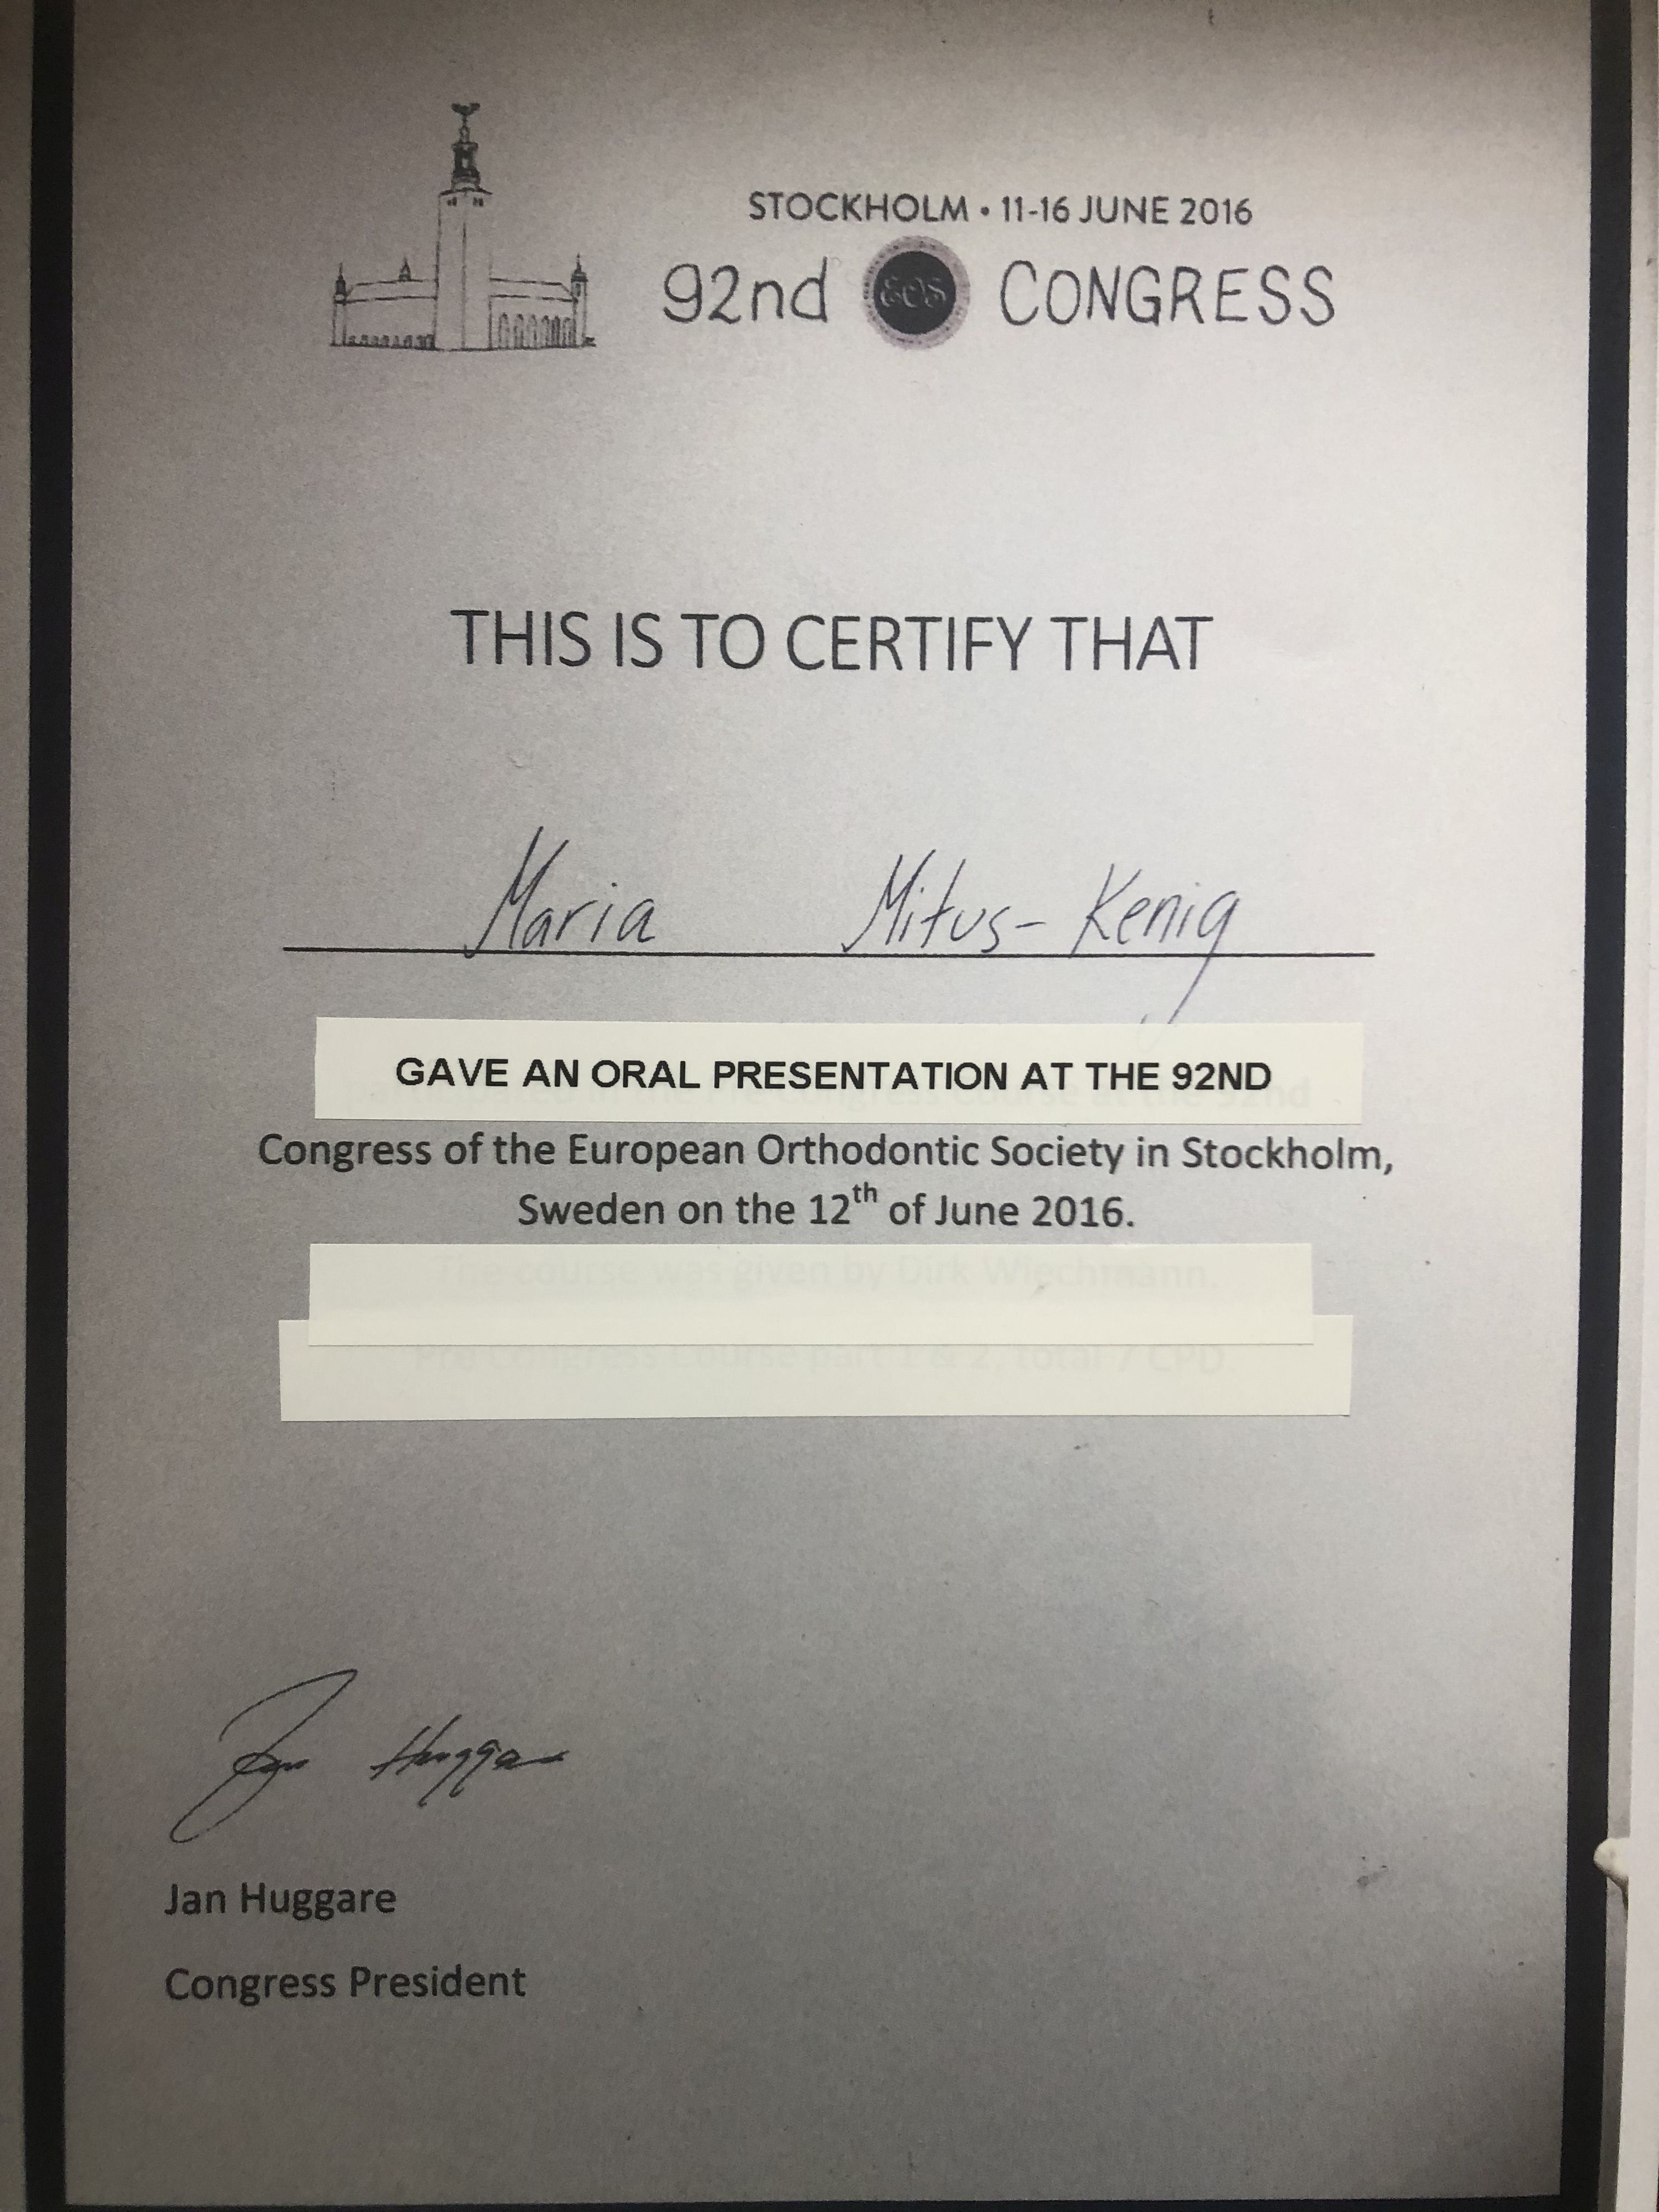 Certificate of attendance at Congress of the European Orthodontic Society in Stockholm